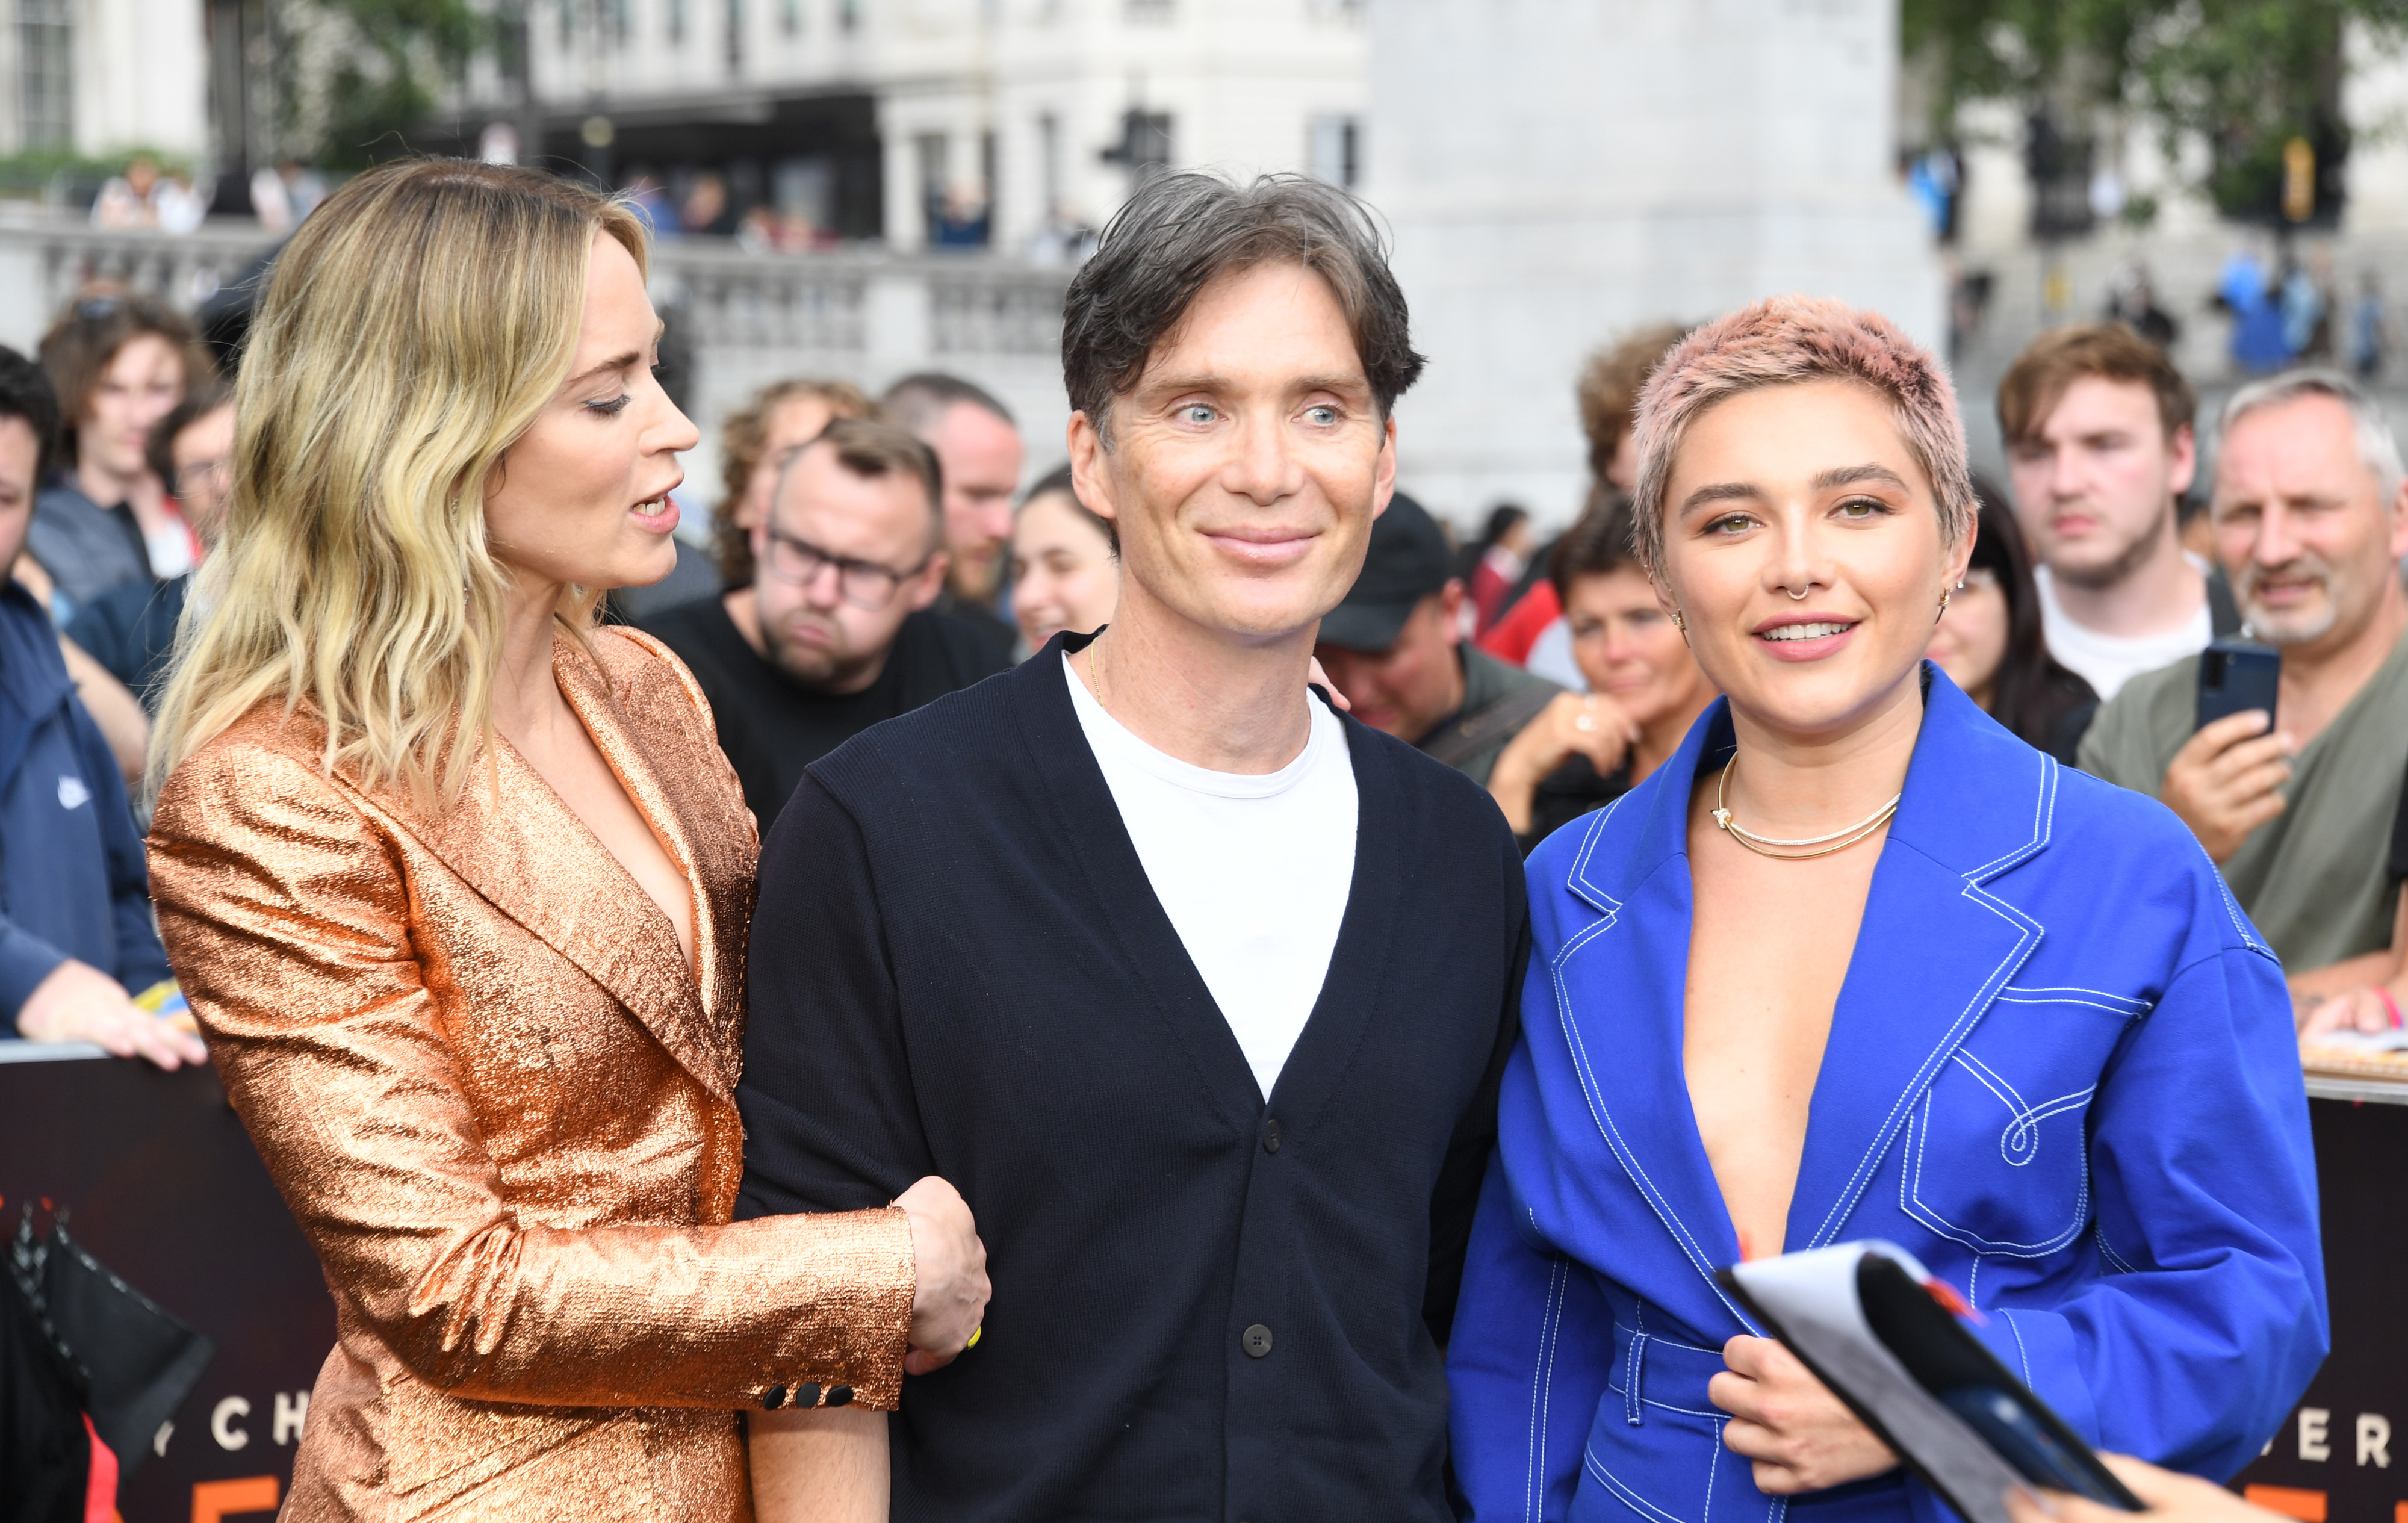 Close-up of Florence, Emily, and Cillian at a media event